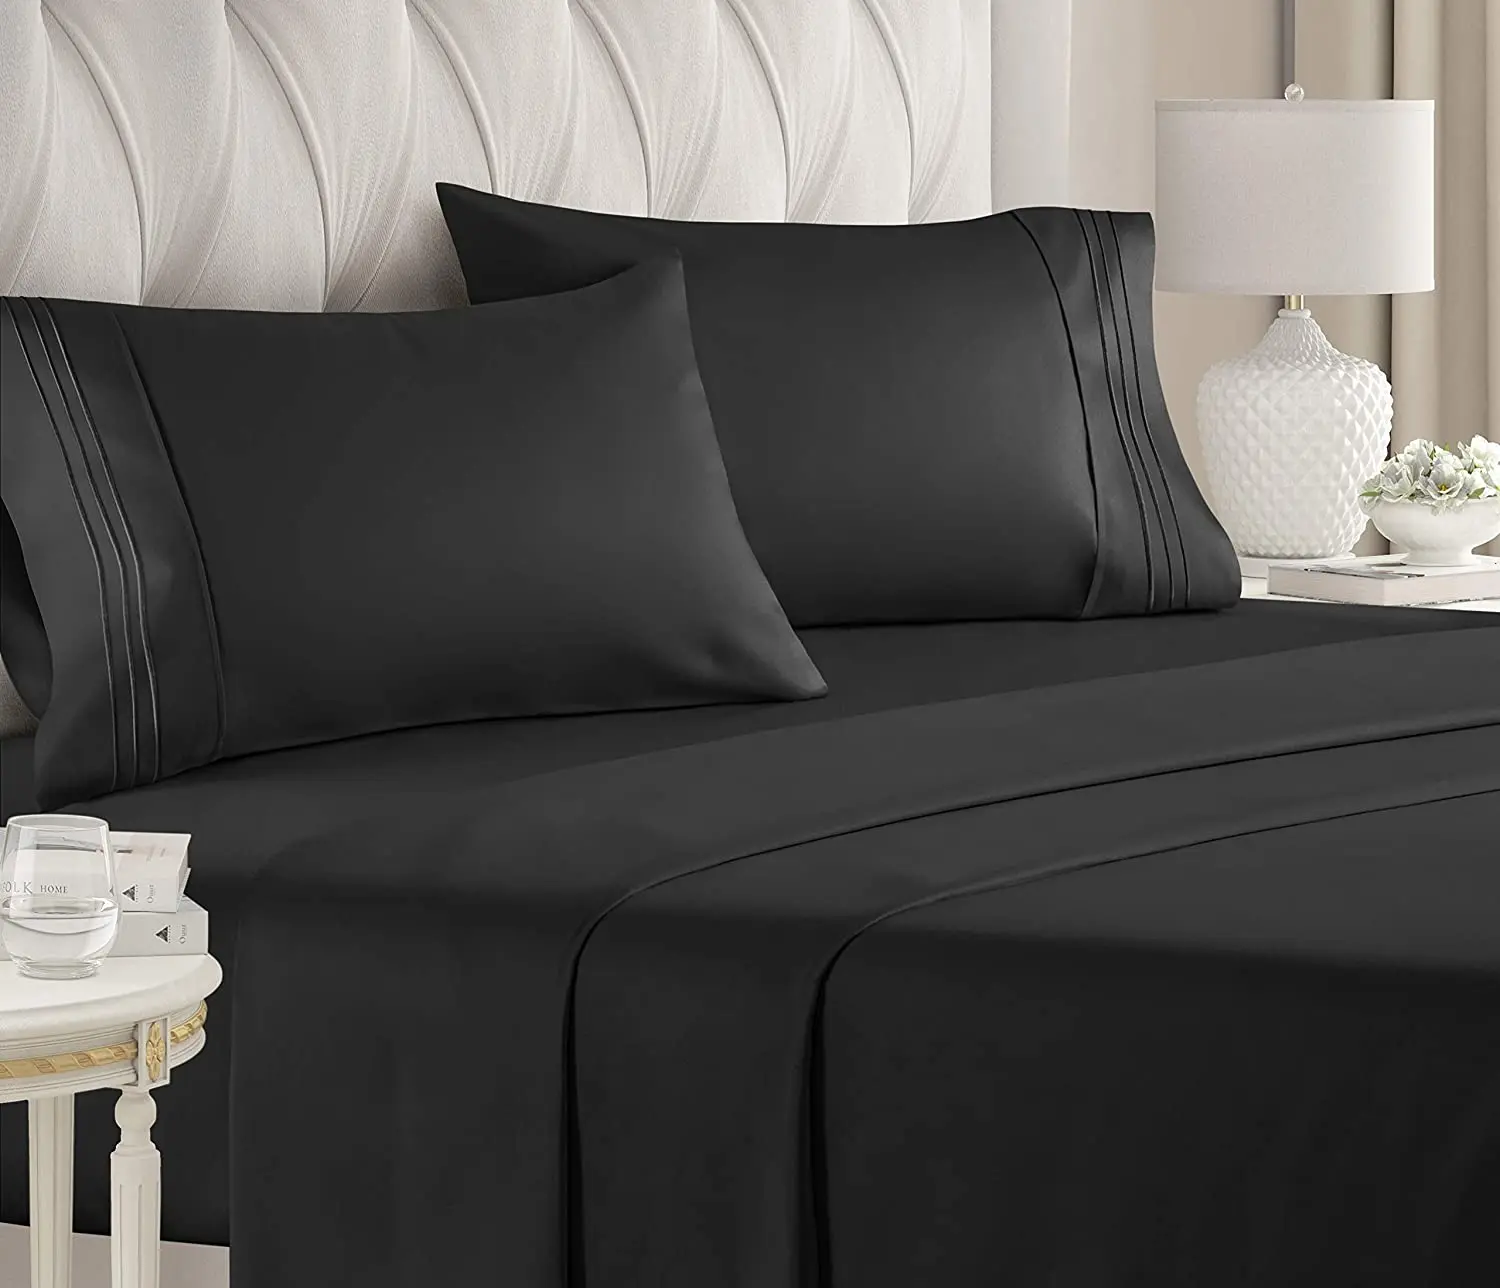 New Design 1800TC Ultra SOFT 4 Pcs FLAT & FITTED Bed Sheet Set Single/Double/Queen/King Size -Black Color